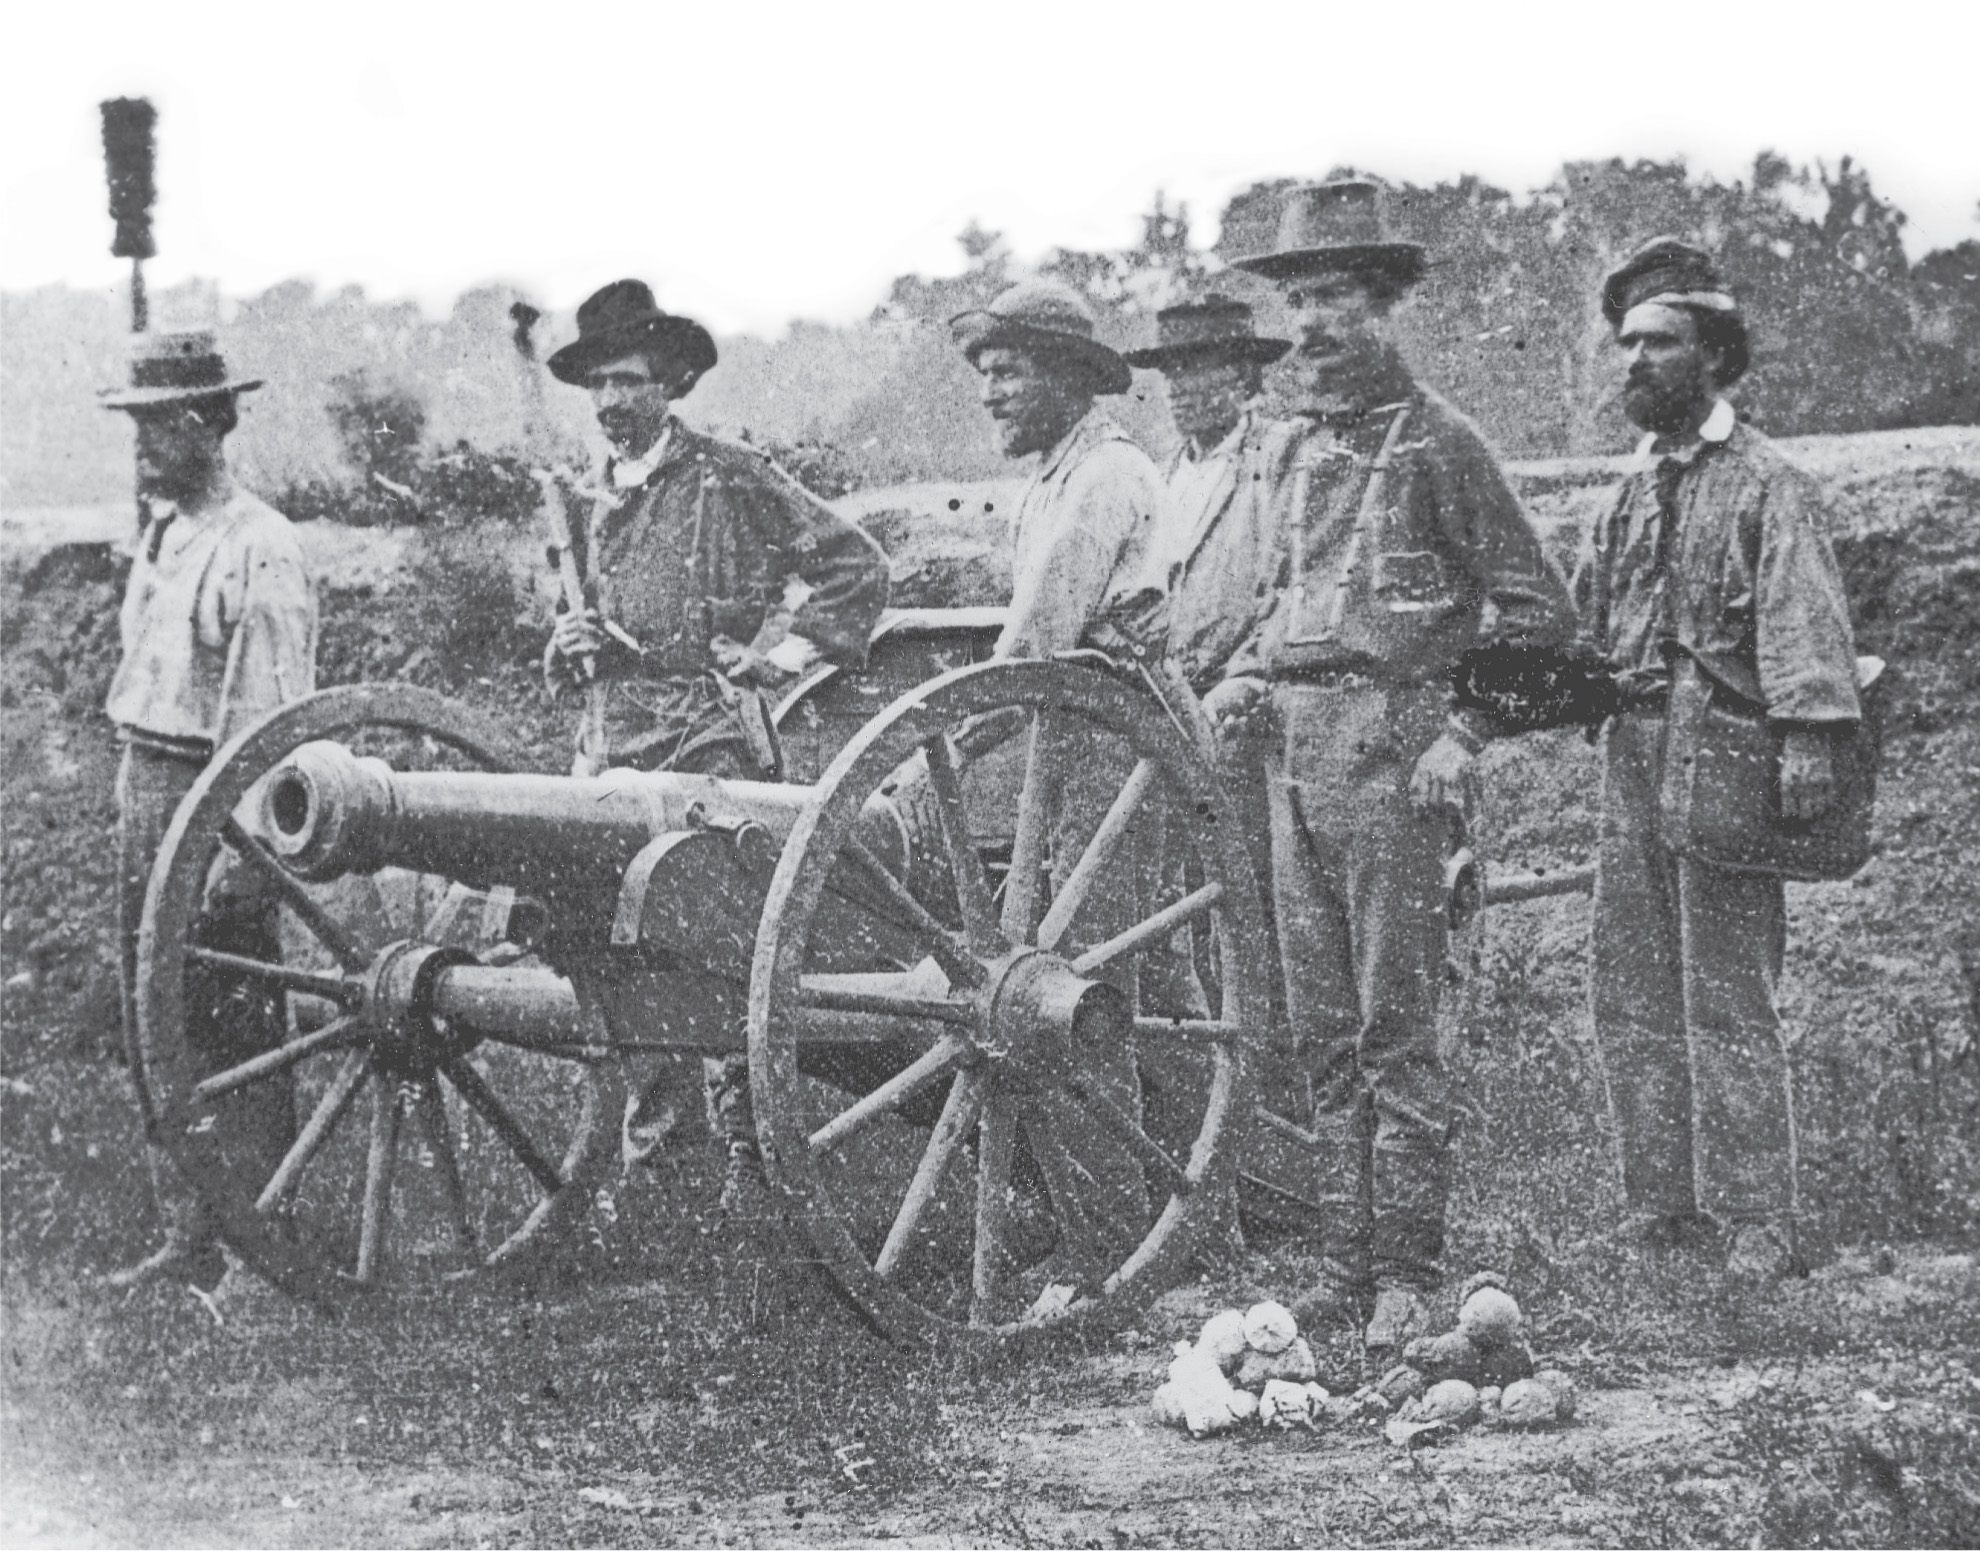 A photo: men stand by a cannon.